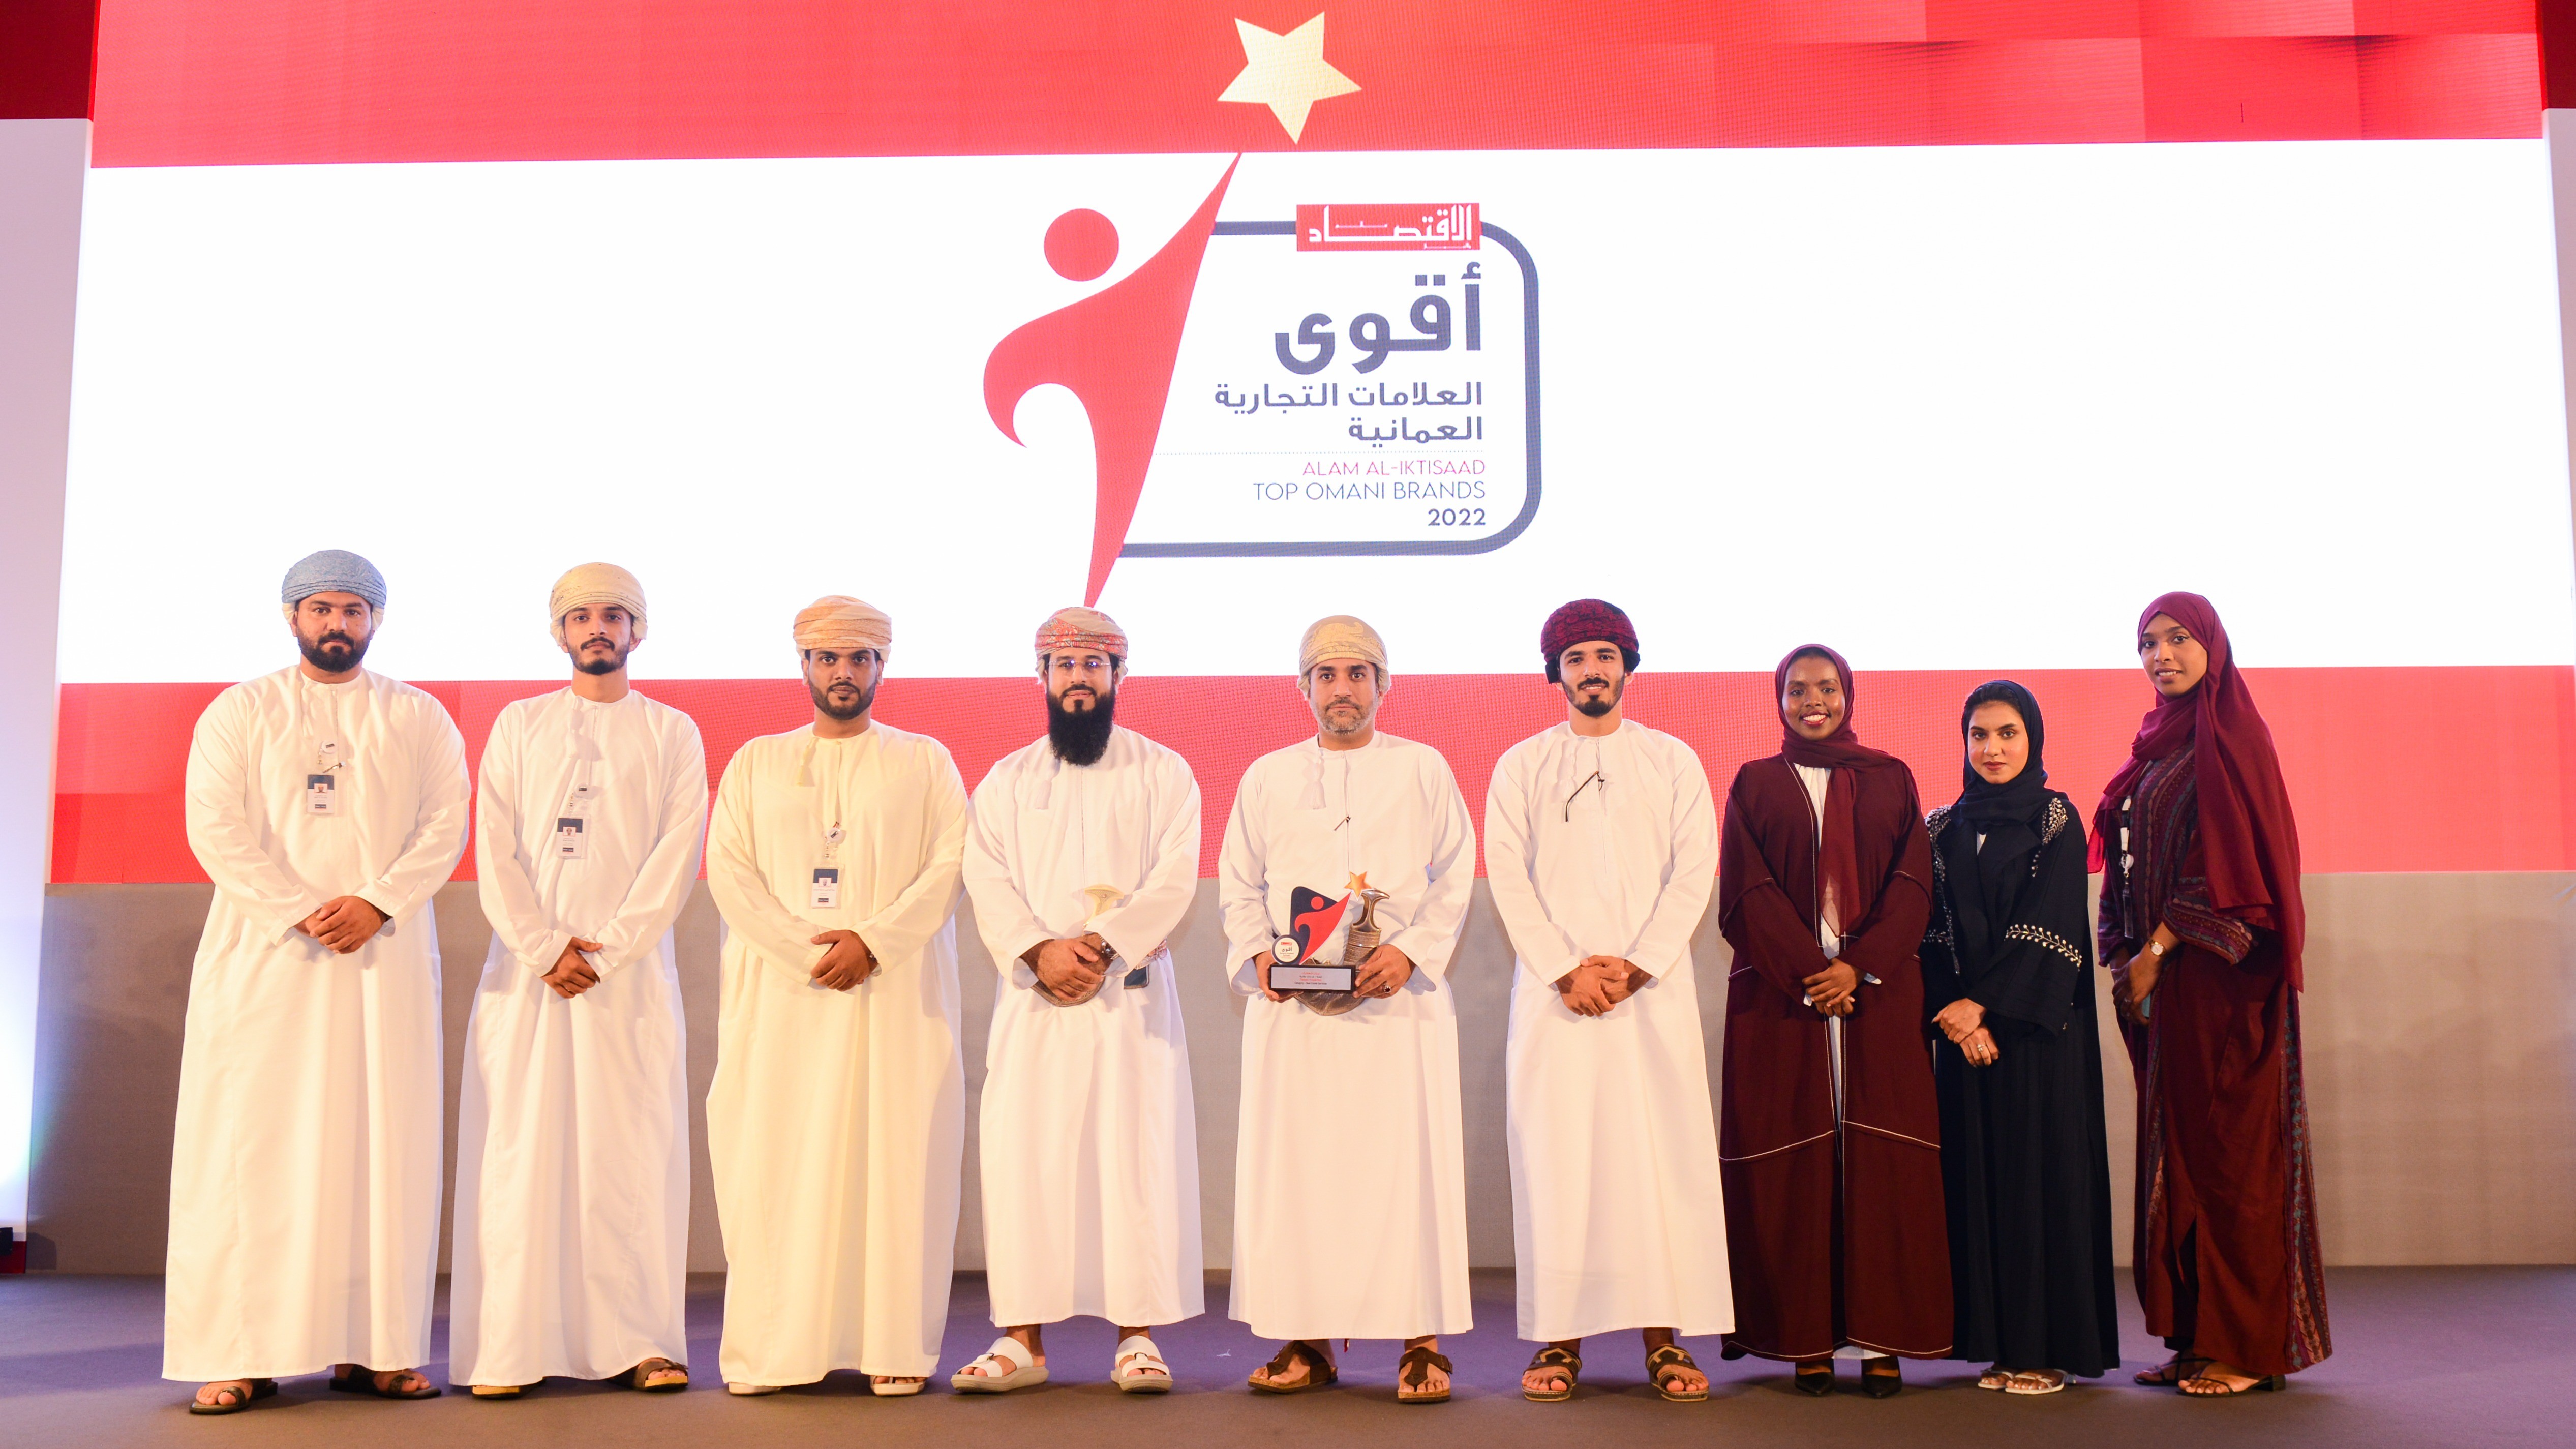 Tibiaan Wins Top Omani Brand in Real Estate Services